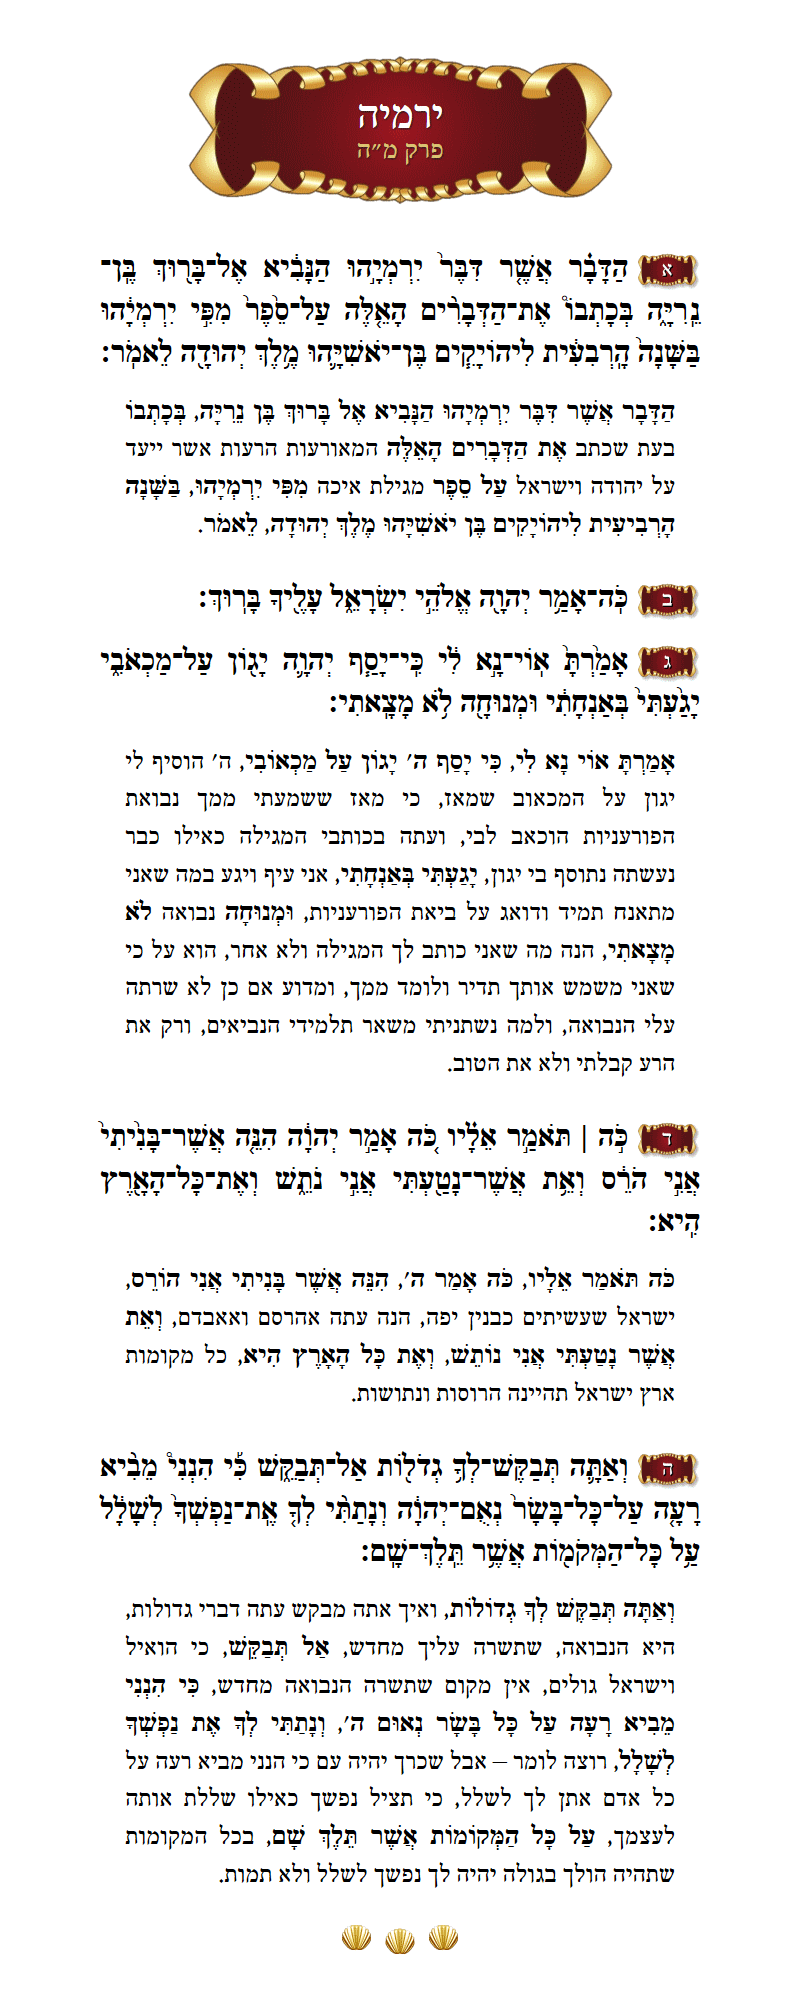 Sefer Yirmeyohu Chapter 45 with commentary